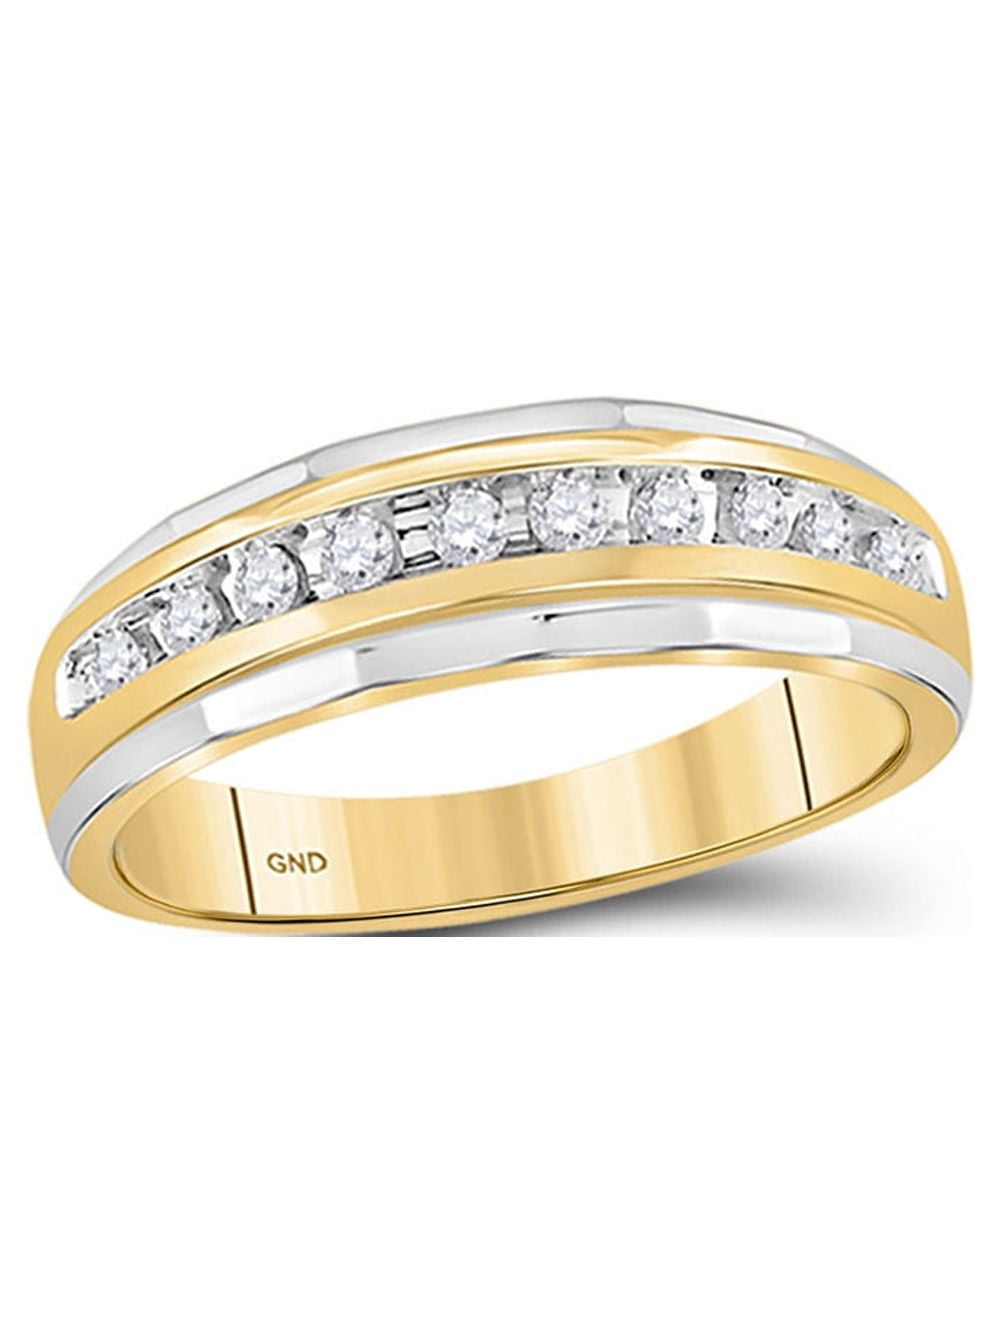 FB Jewels 10kt Two-tone Gold Mens Round Diamond Wedding Band Ring 1/4 ...